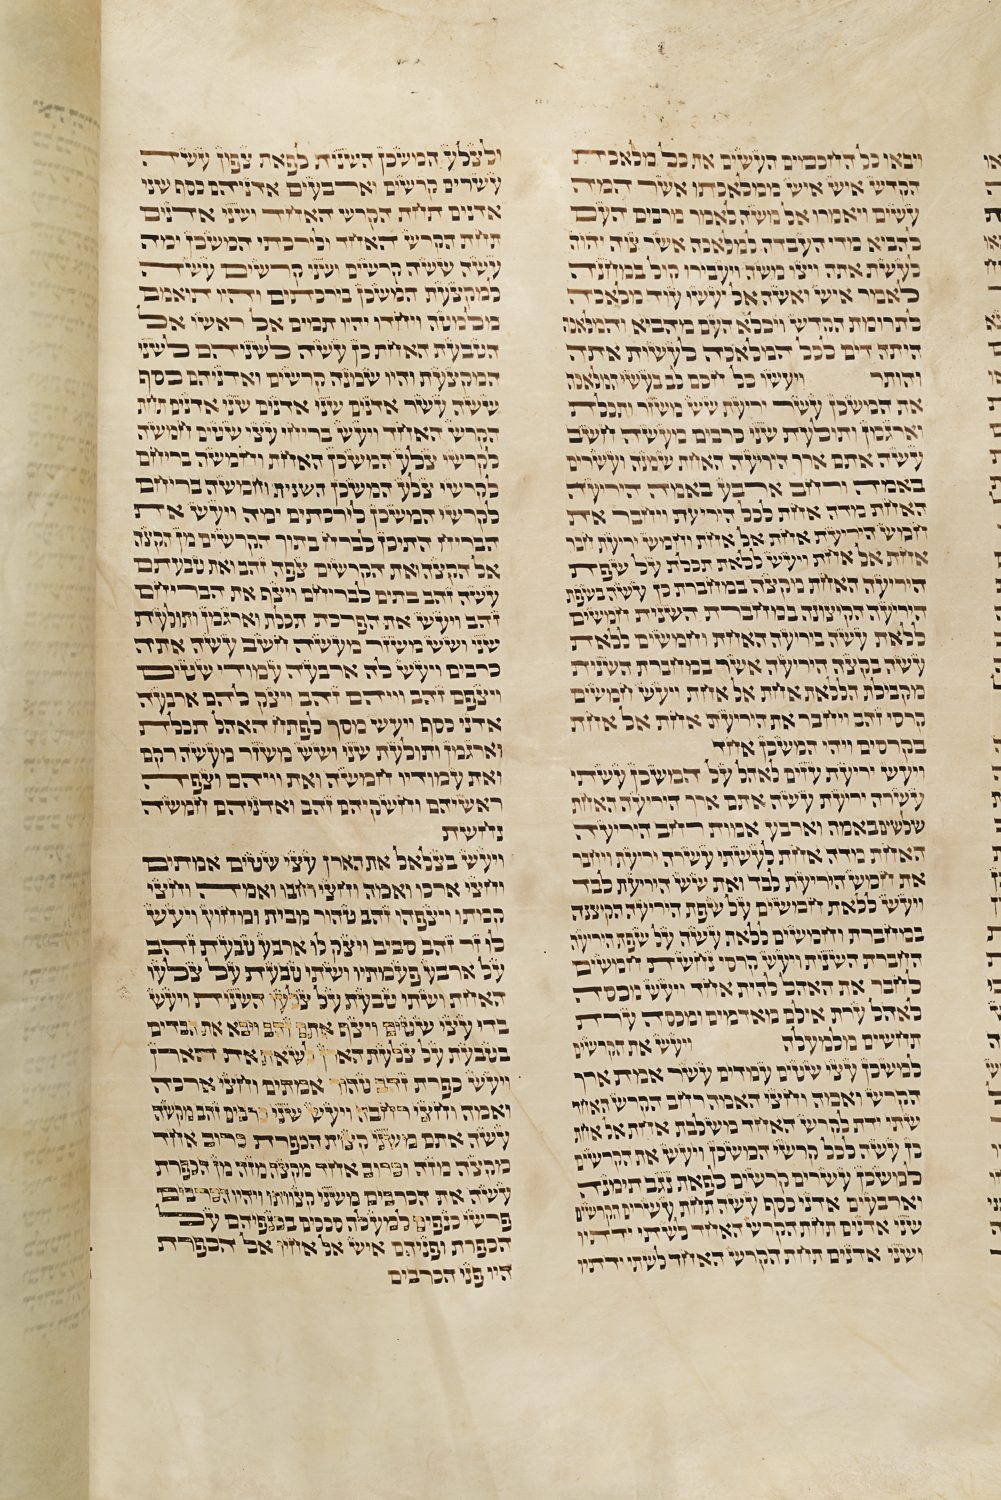 The Torah contains the biblical commandments of Judaism. Its written form includes five books in which God transmitted his message to Moses. (Photo: Peter Berra)